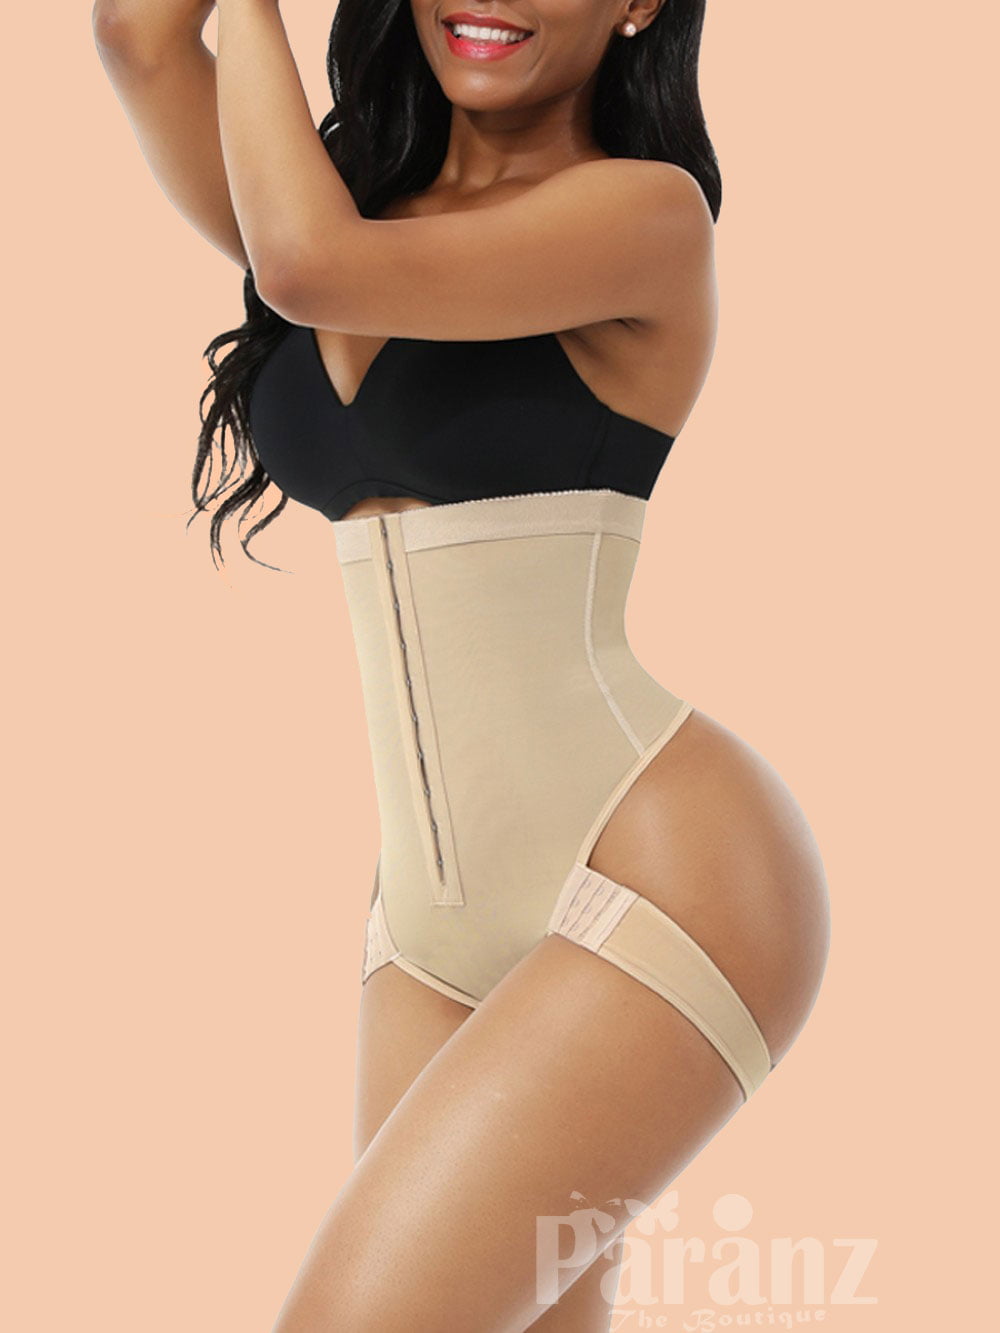 Nude Solid Shapewear 5821150.htm - Buy Nude Solid Shapewear 5821150.htm  online in India